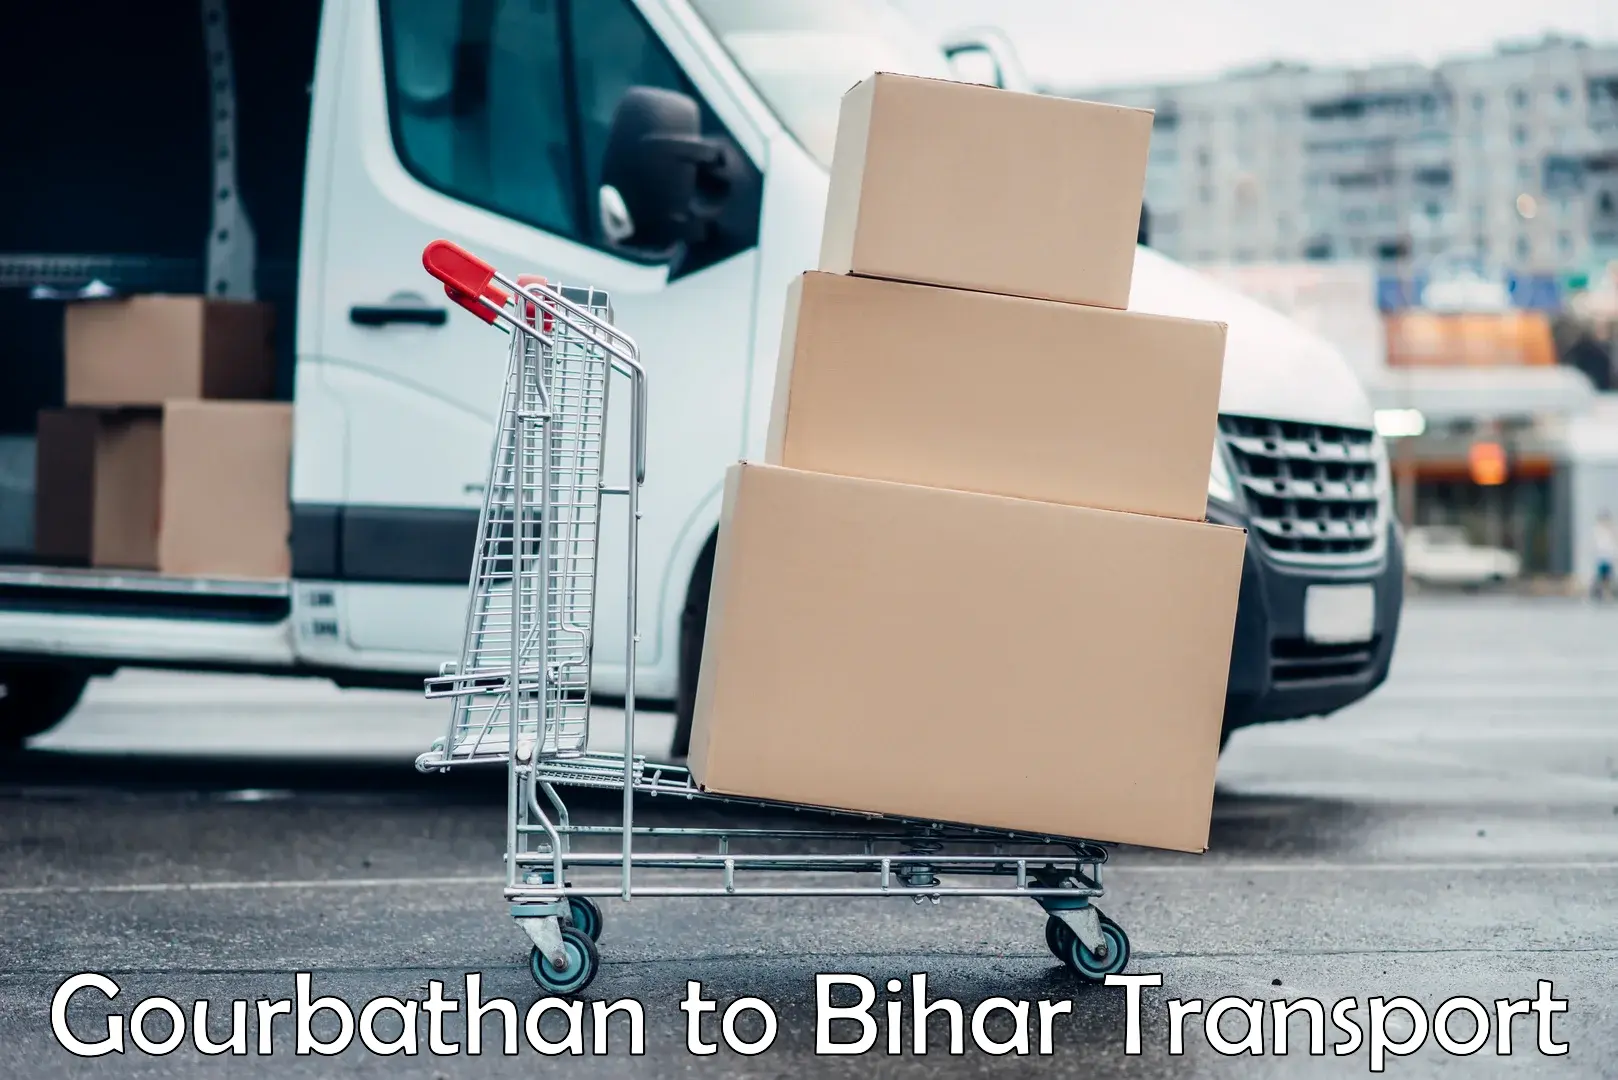 Container transport service Gourbathan to Bagaha